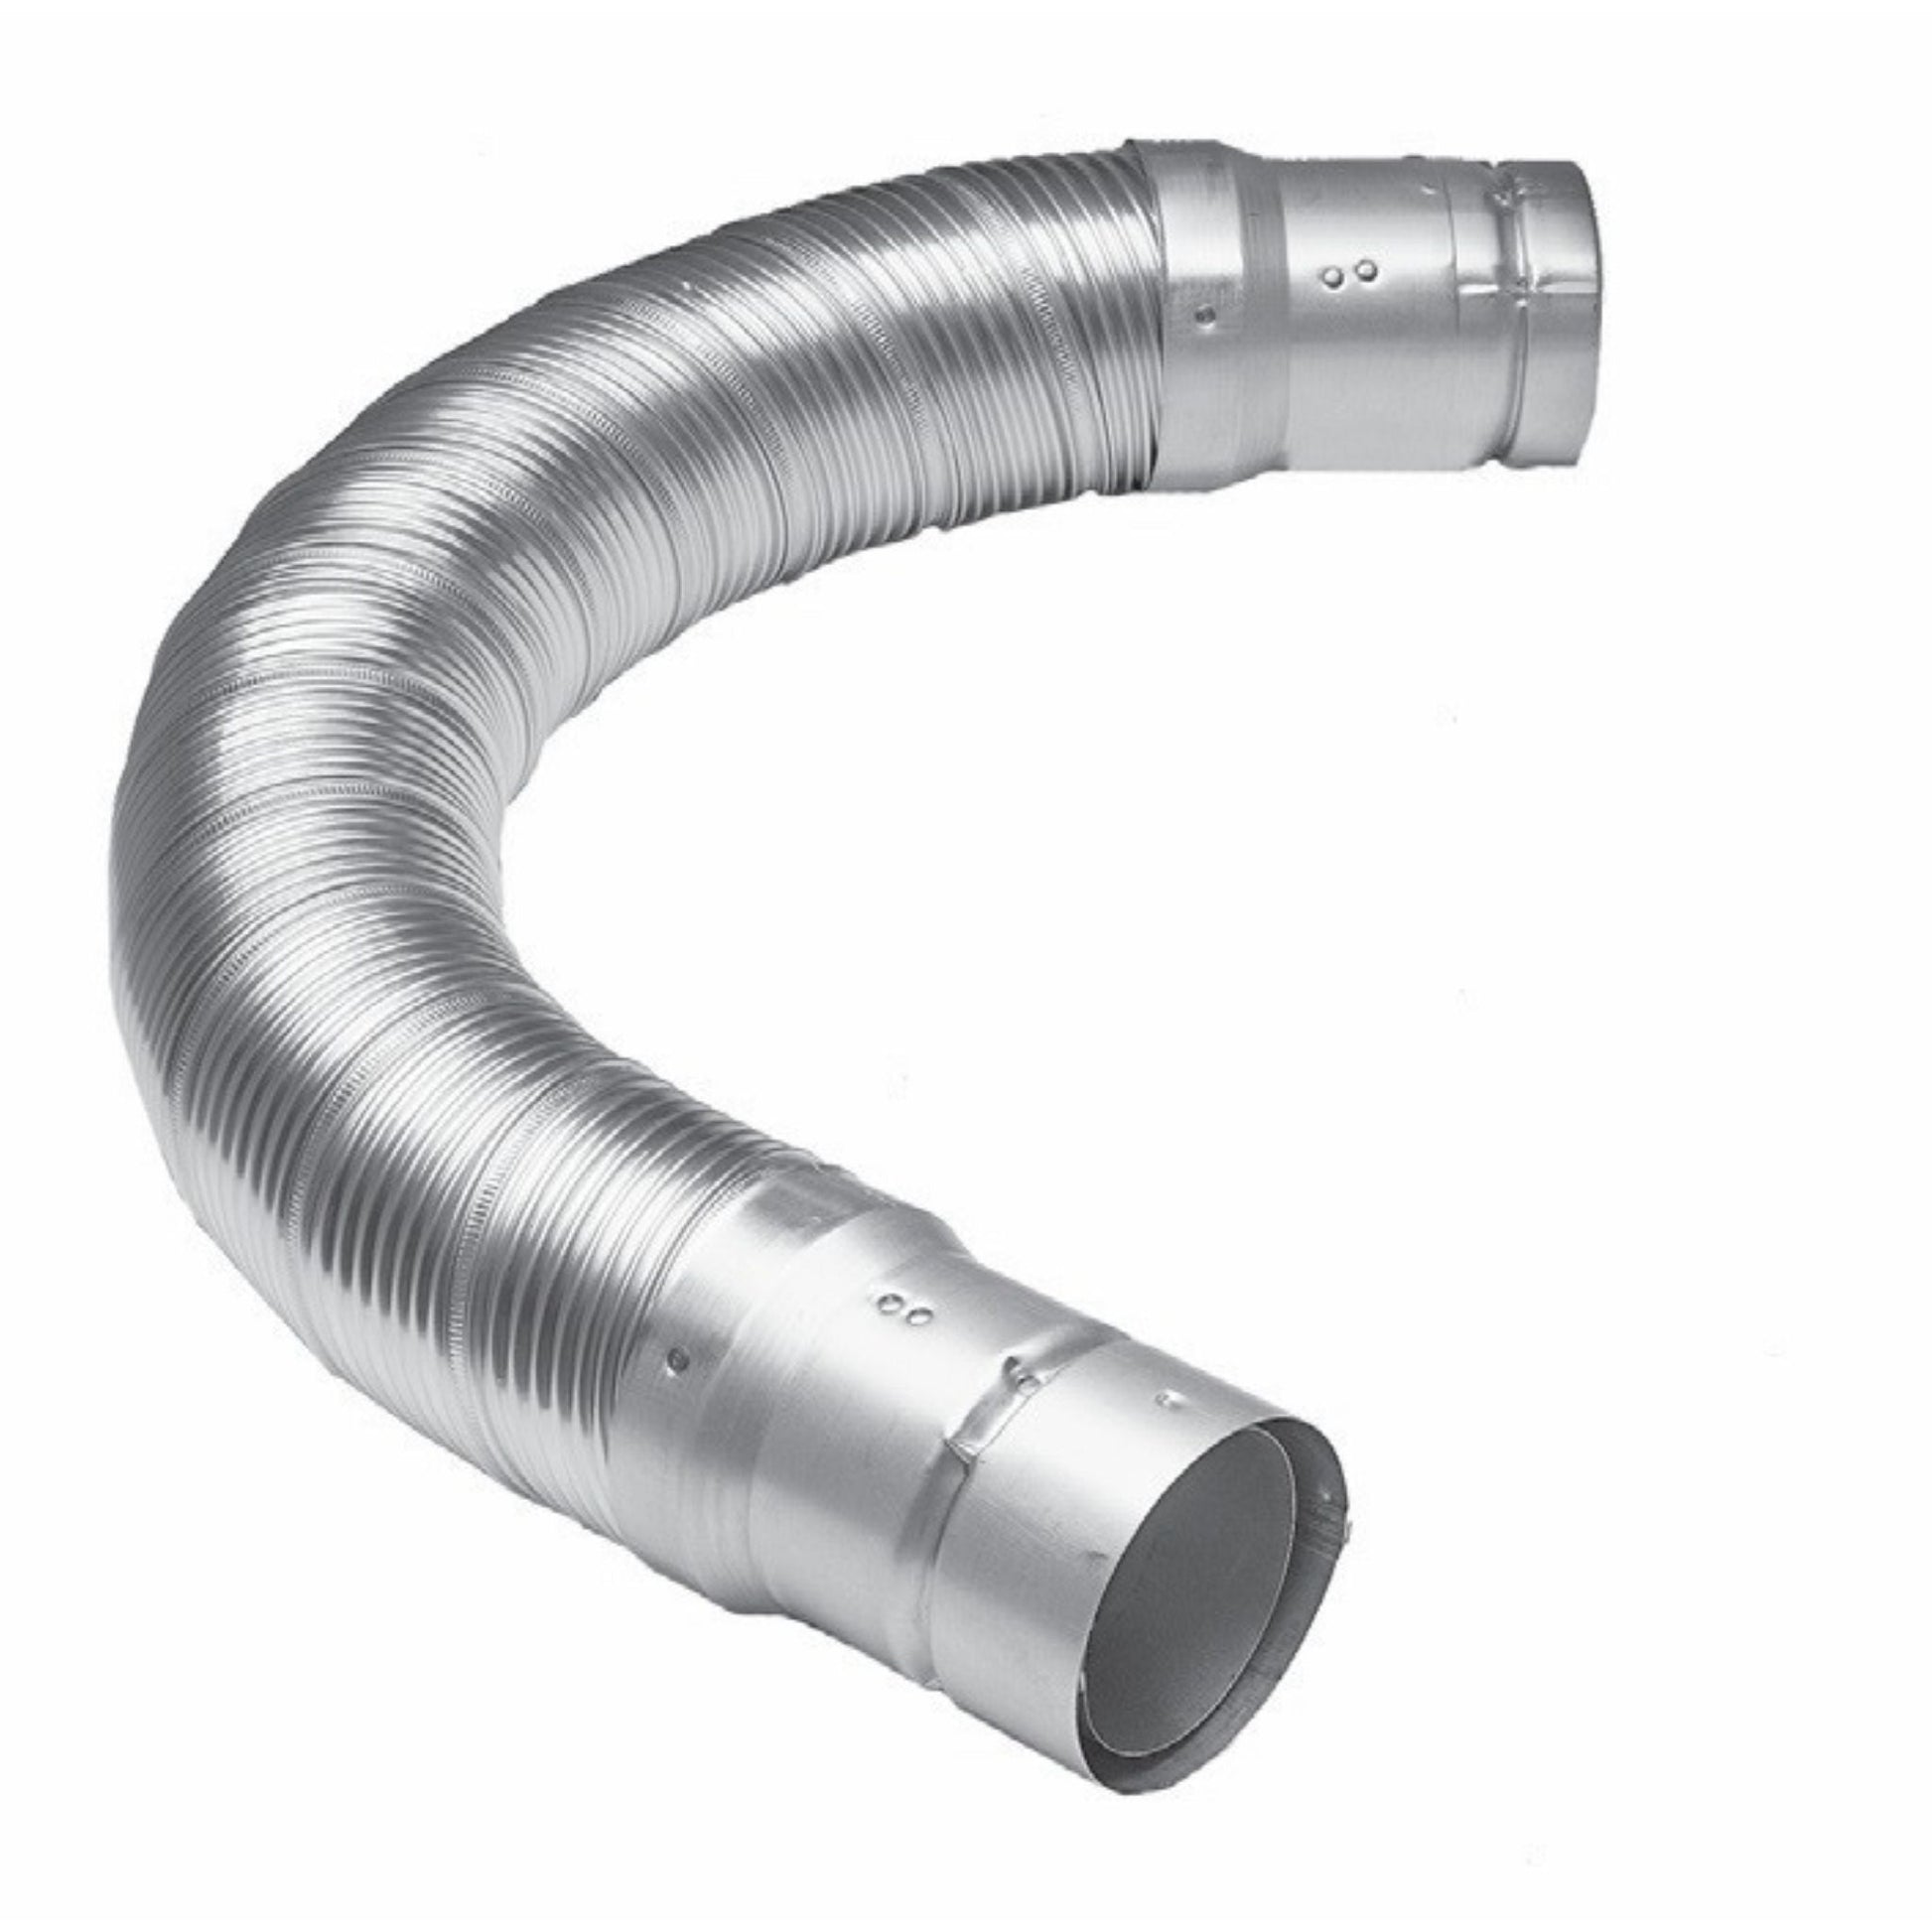 DuraVent DuraConnect II B-Vent 4" x 60" Flexible Double-Wall Gas Vent Connector